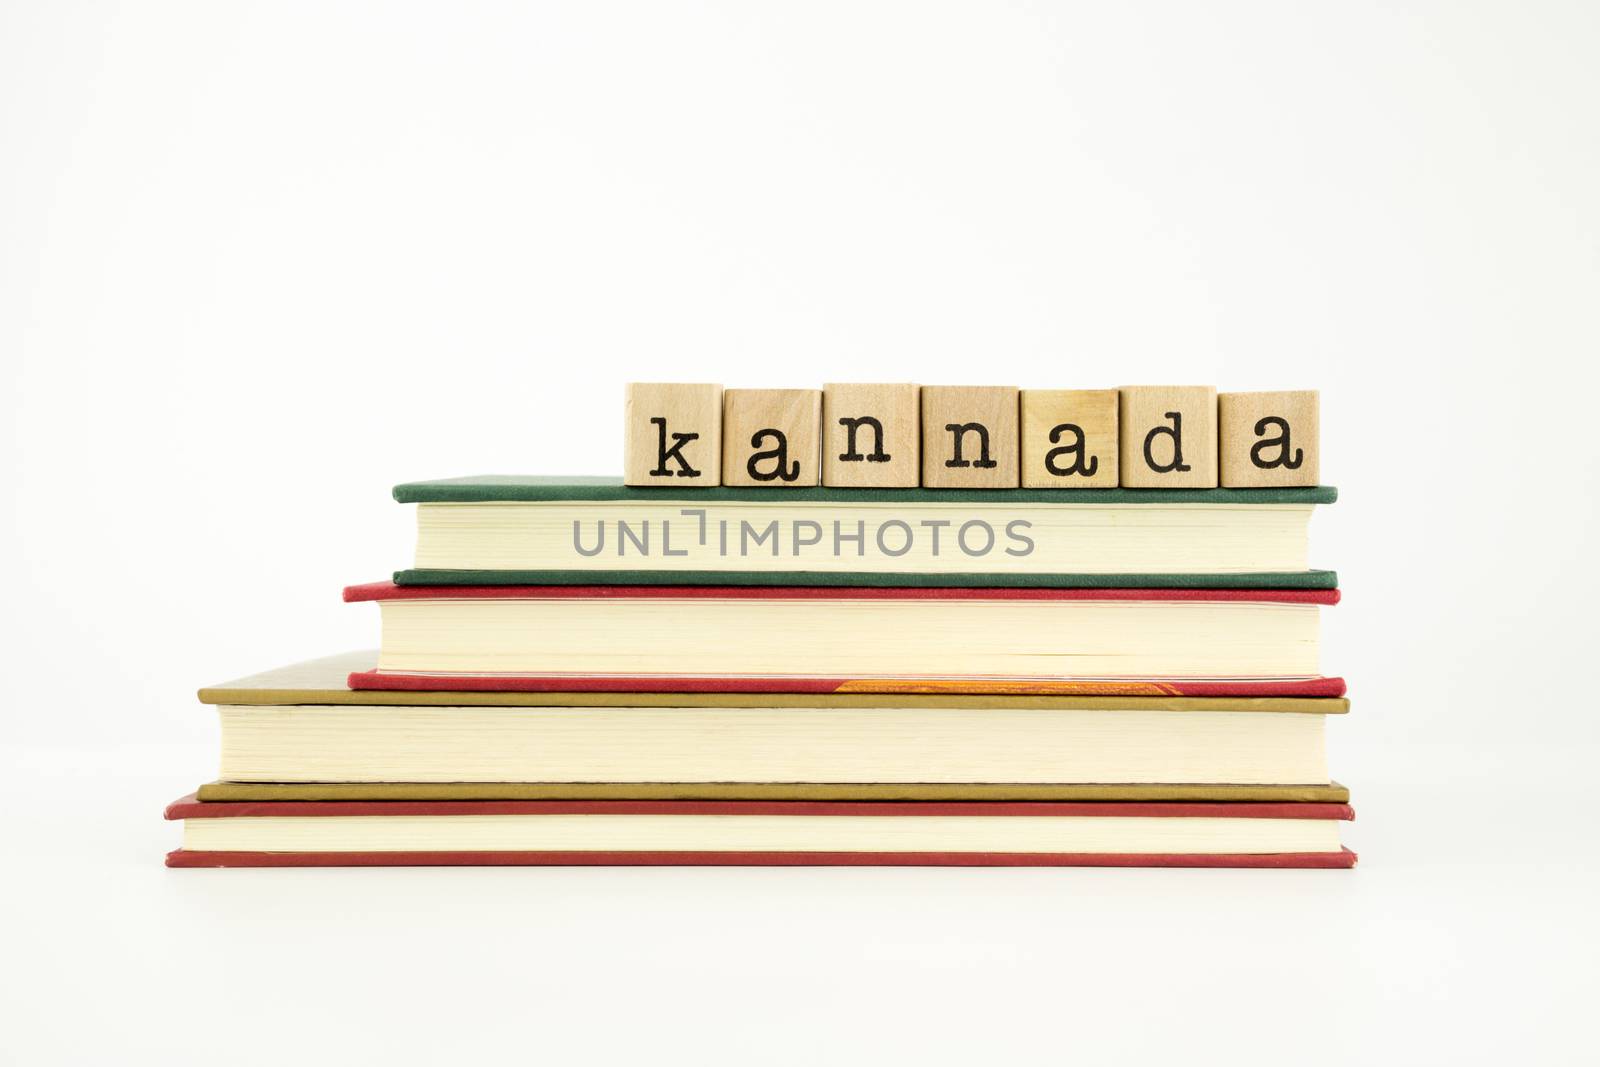 kannada word on wood stamps stack on books, foreign language and translation concept